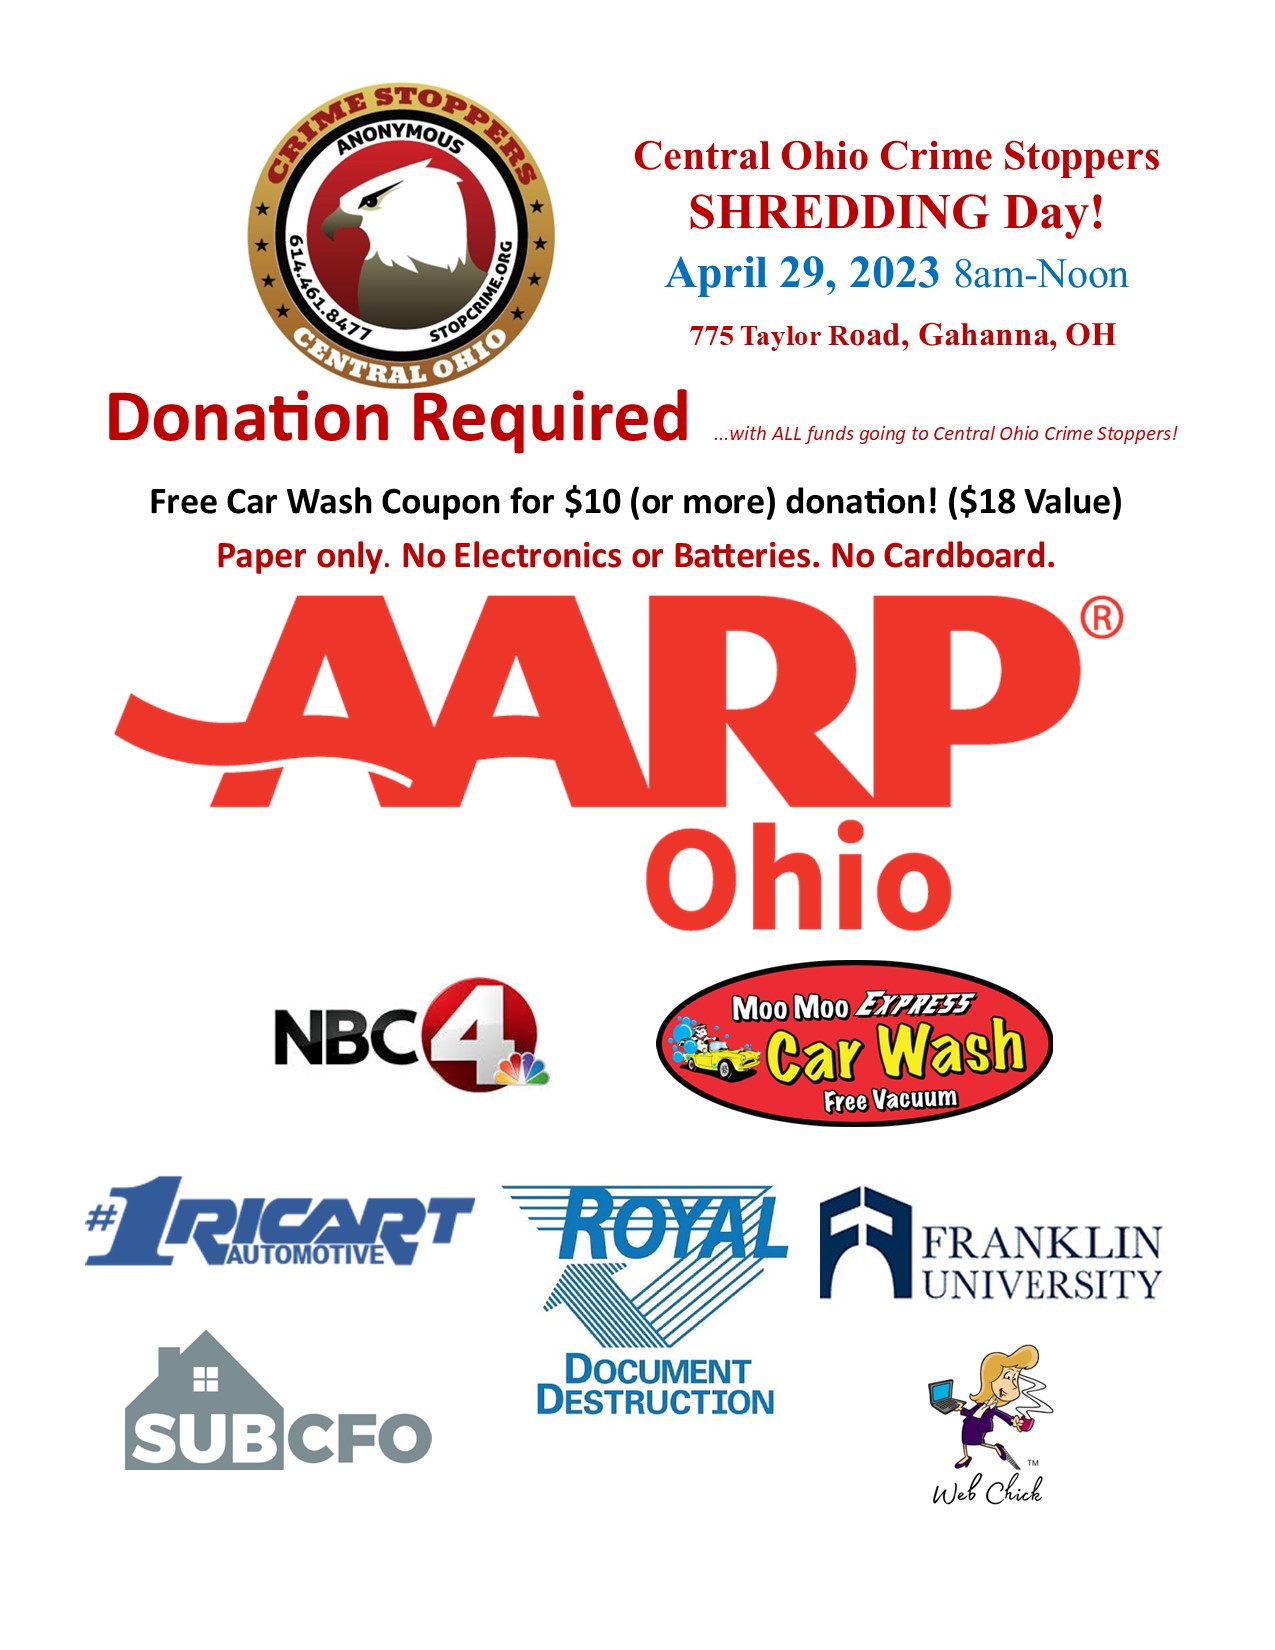 Annual Shredding Day Event Central Ohio Crime Stoppers